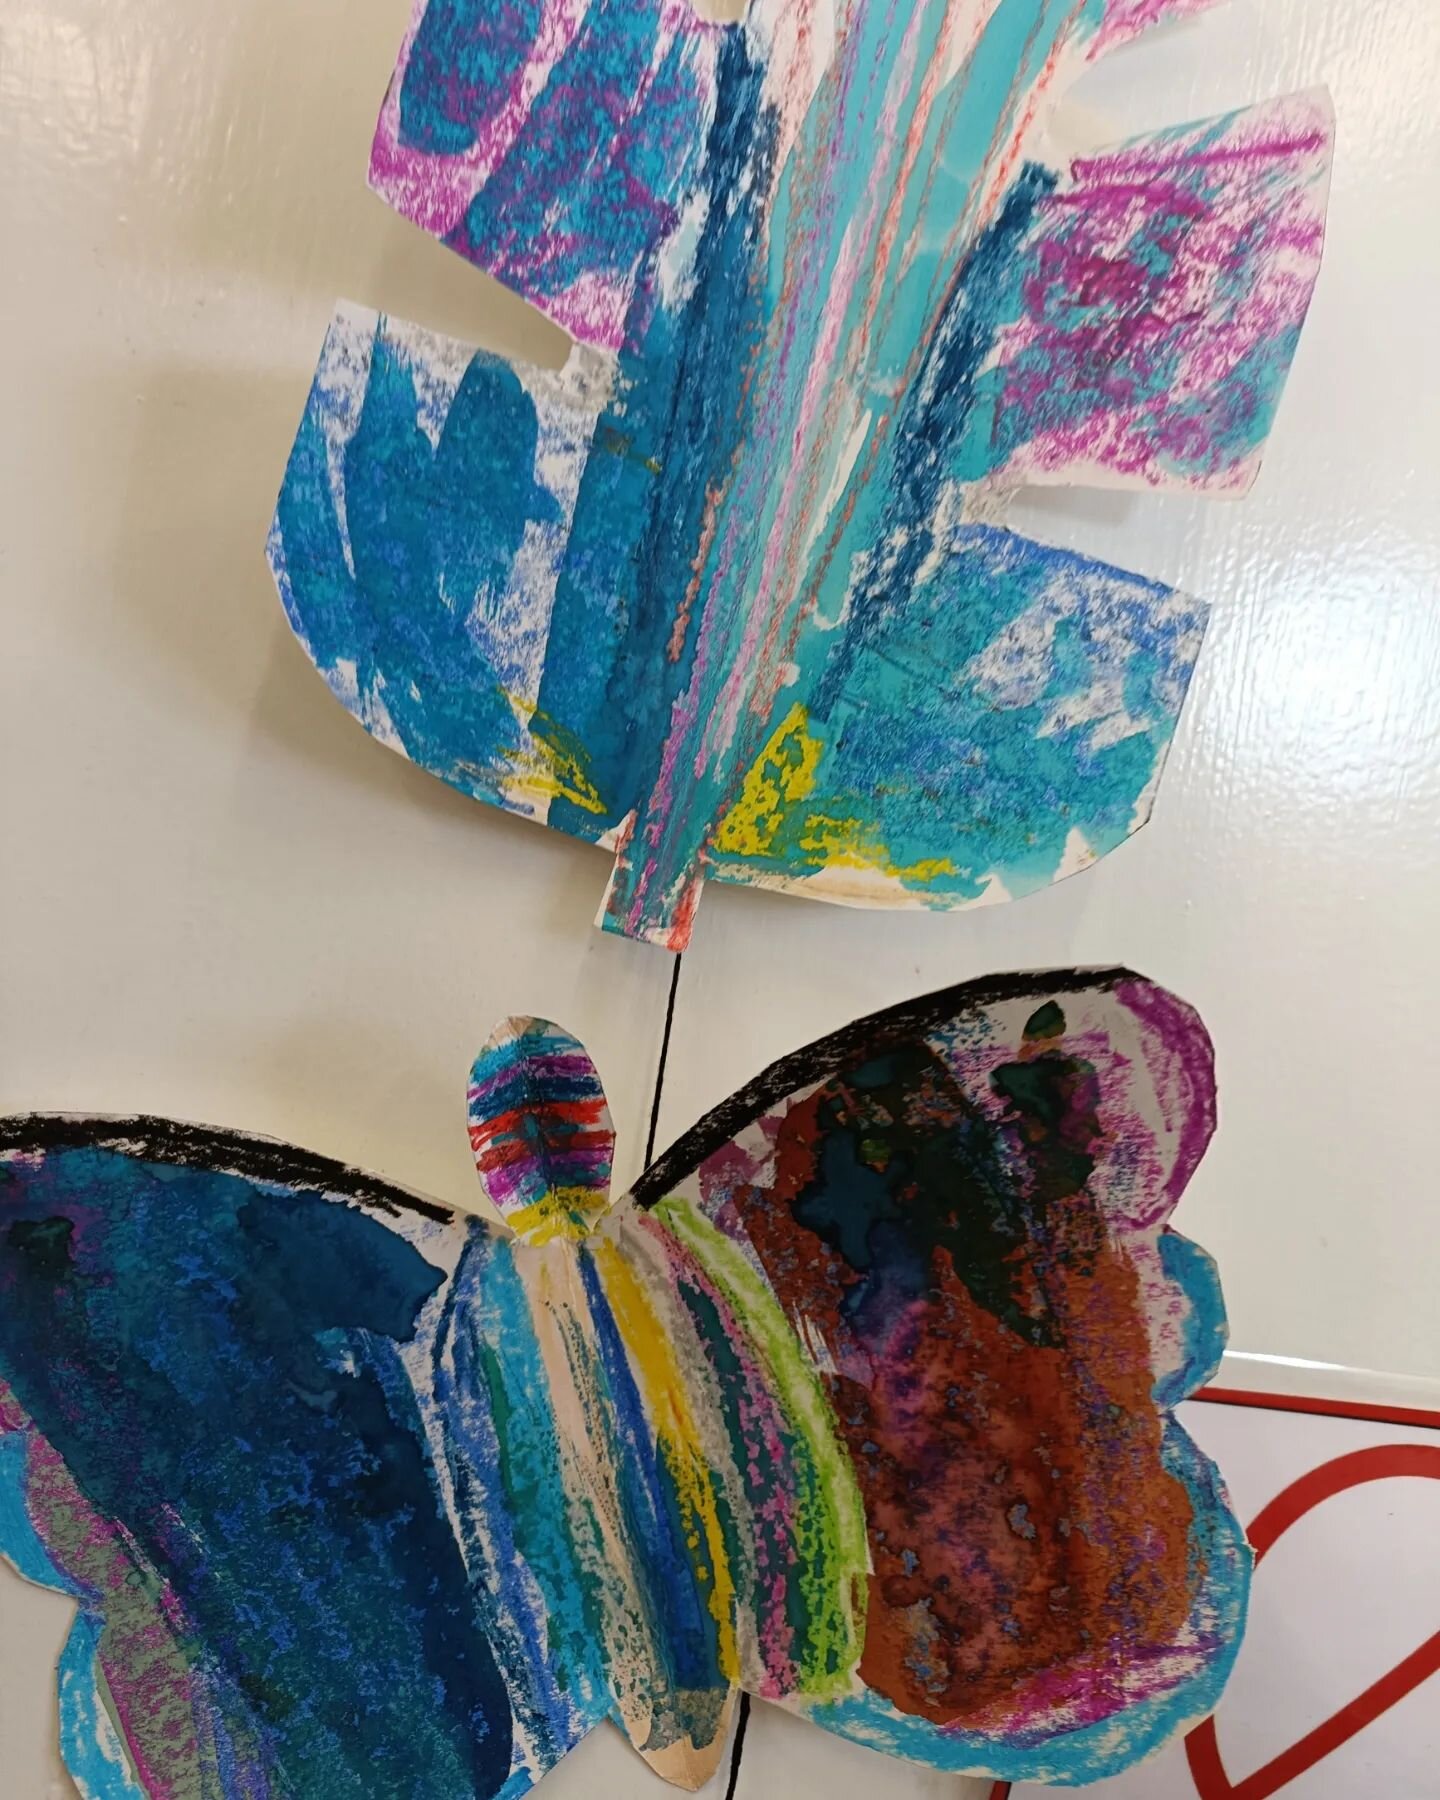 Stunning colourful rainforest creatures. The children had so much fun experimenting with painting and drawing processes!

#mixedmedia #kidspainting #artclub #afterschoolclub